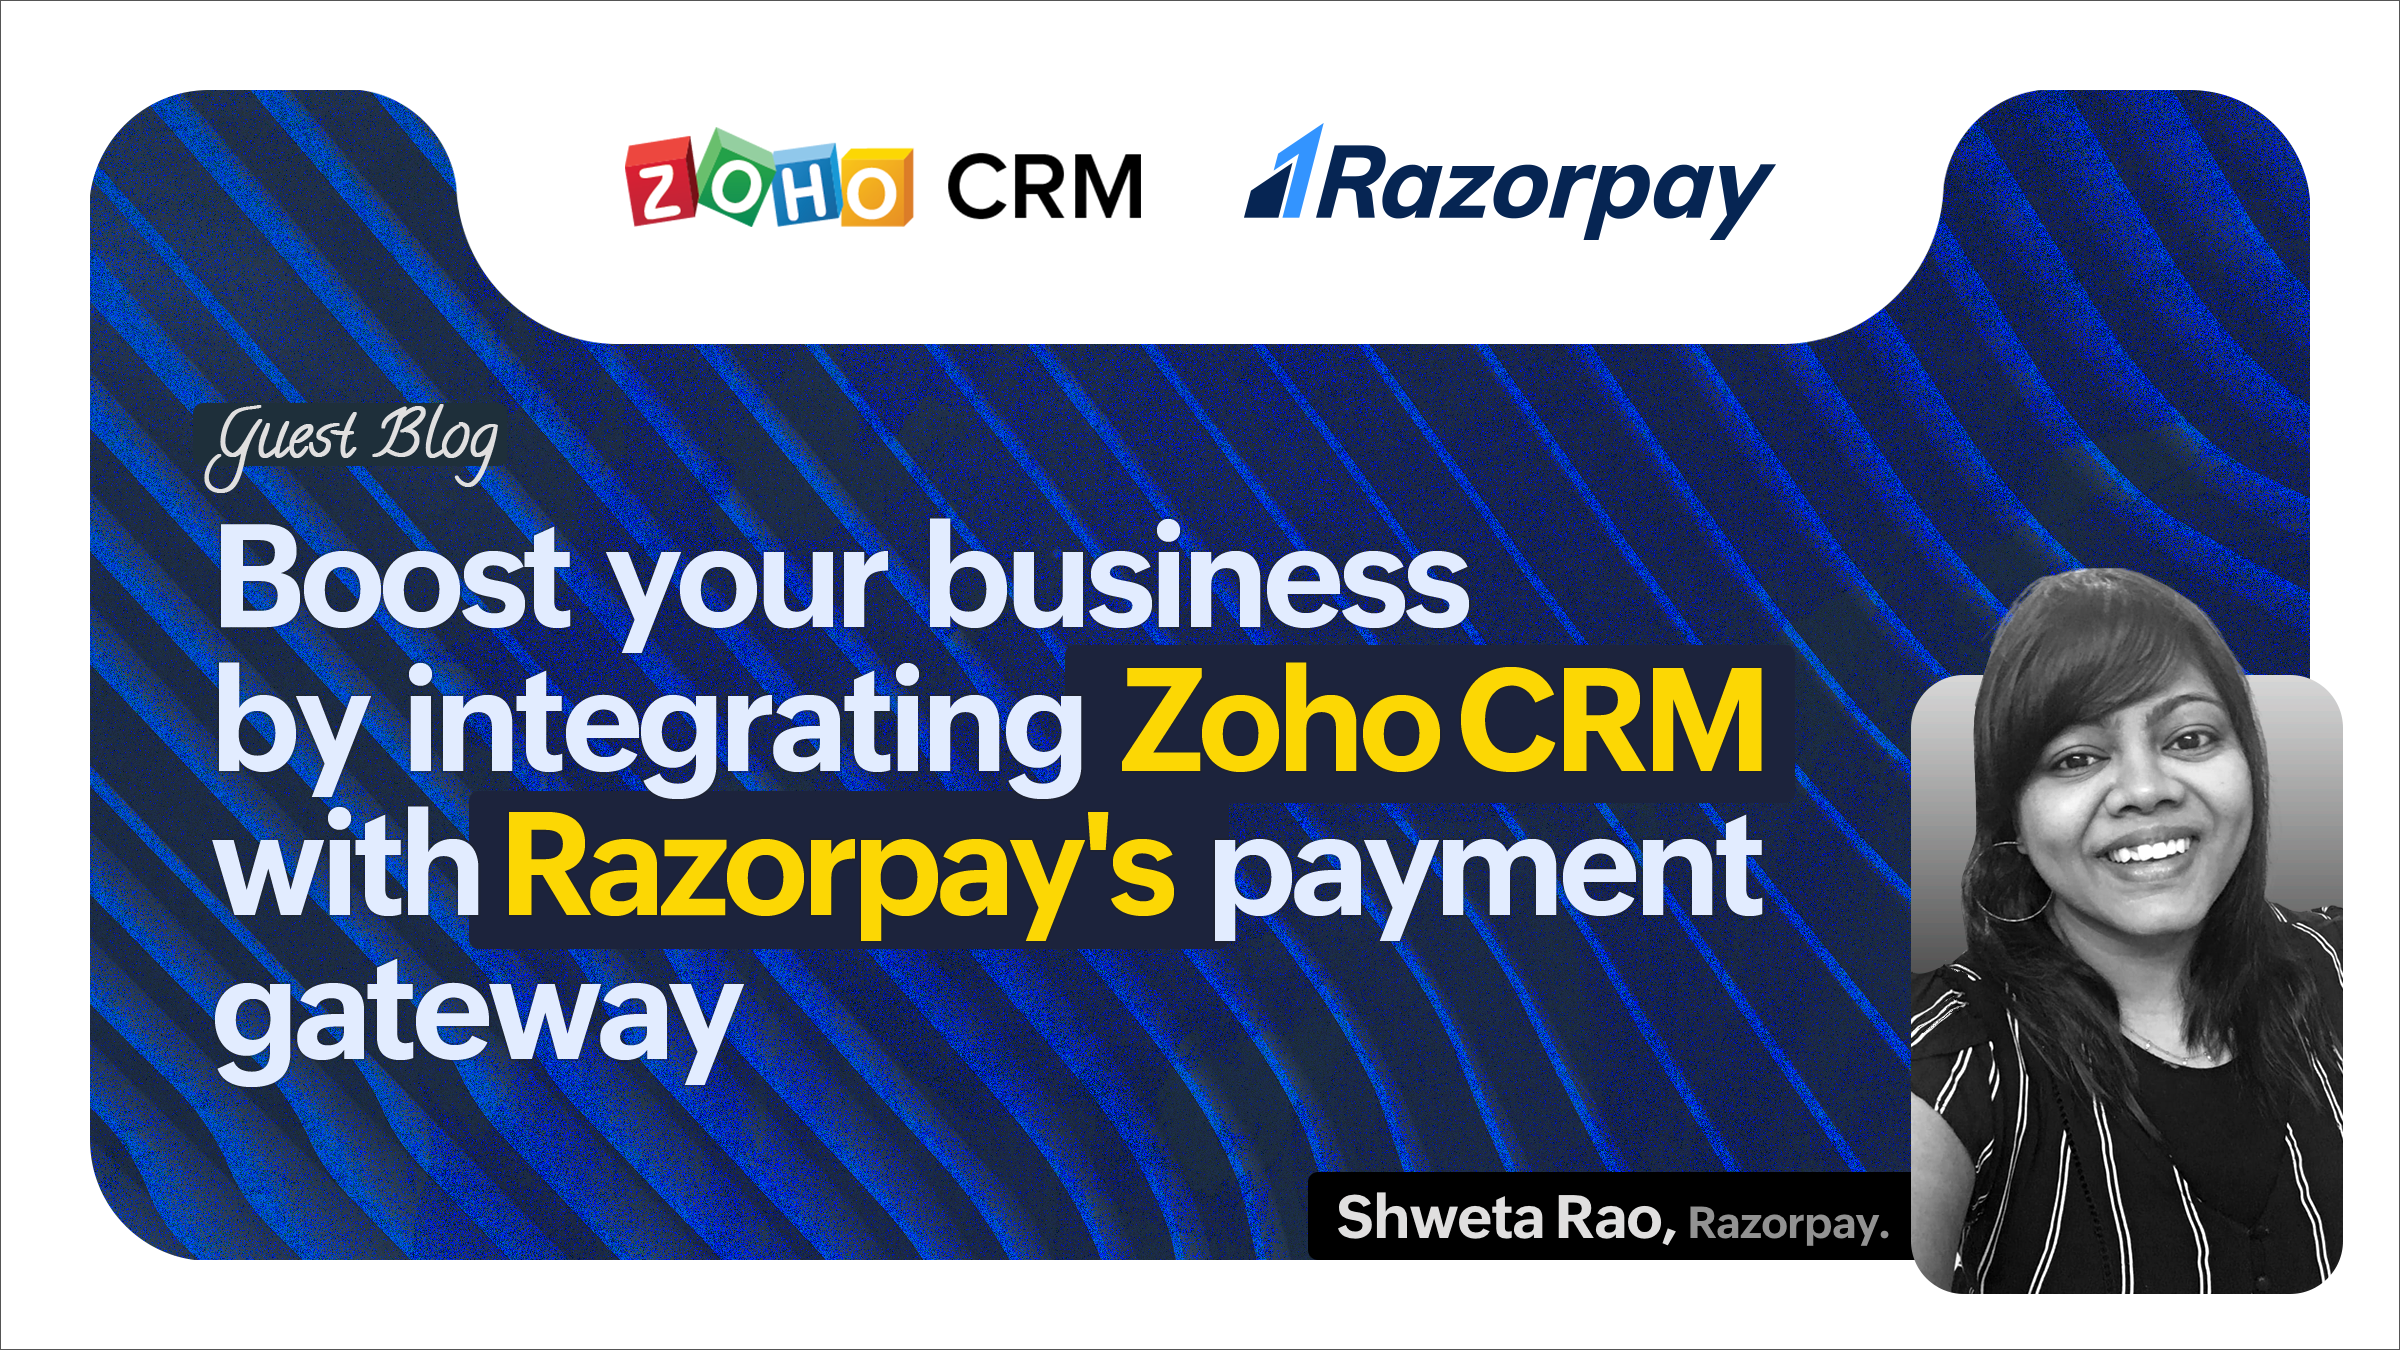 Boost your business by integrating Zoho CRM with Razorpay's payment gateway